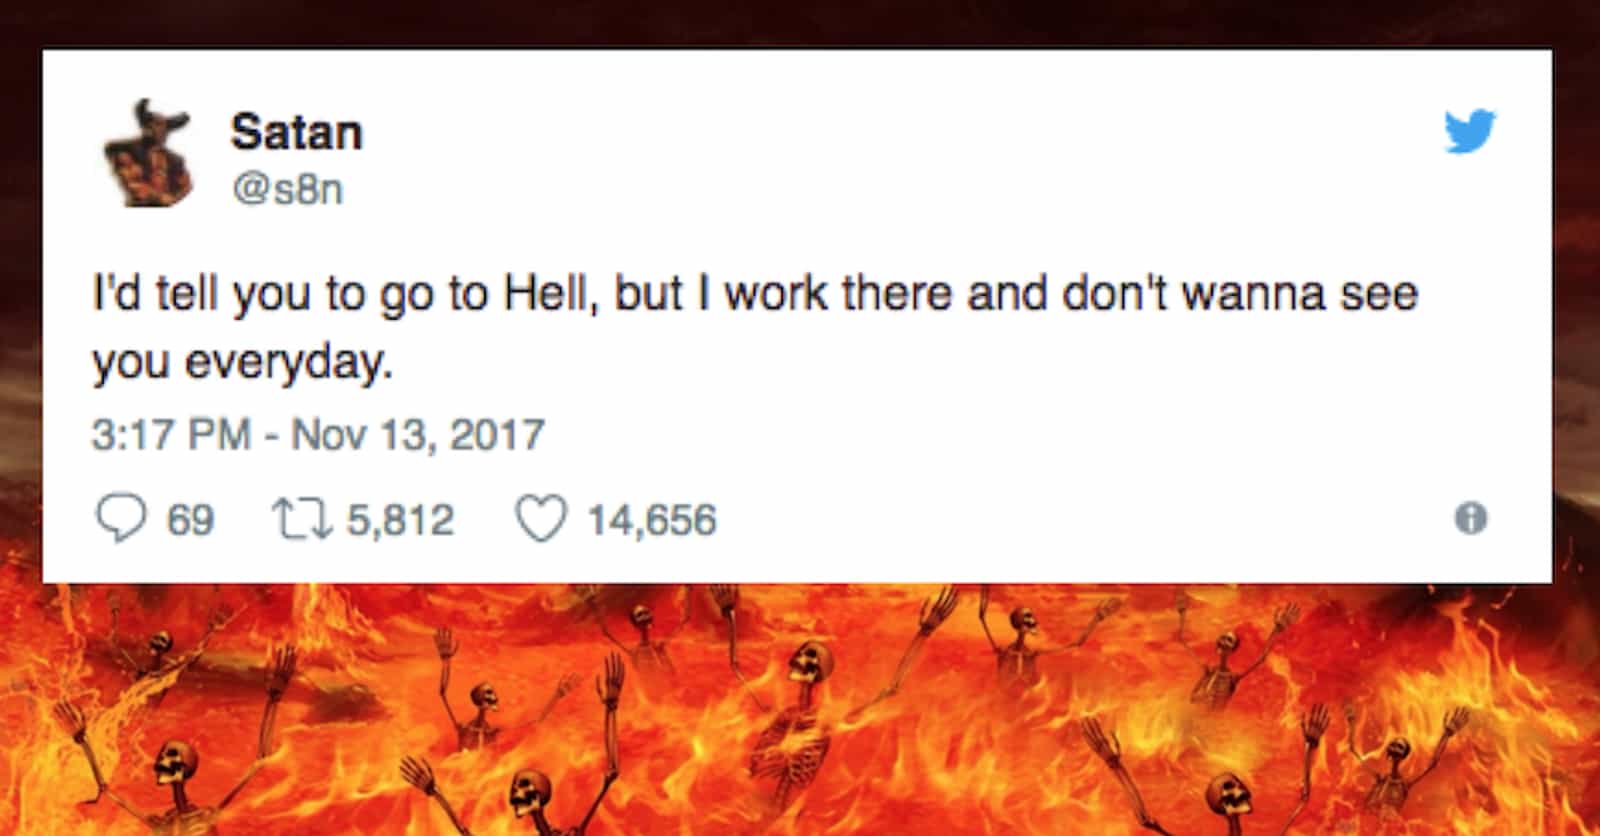 Satan Has A Twitter Account, And Turns Out He's Pretty Funny